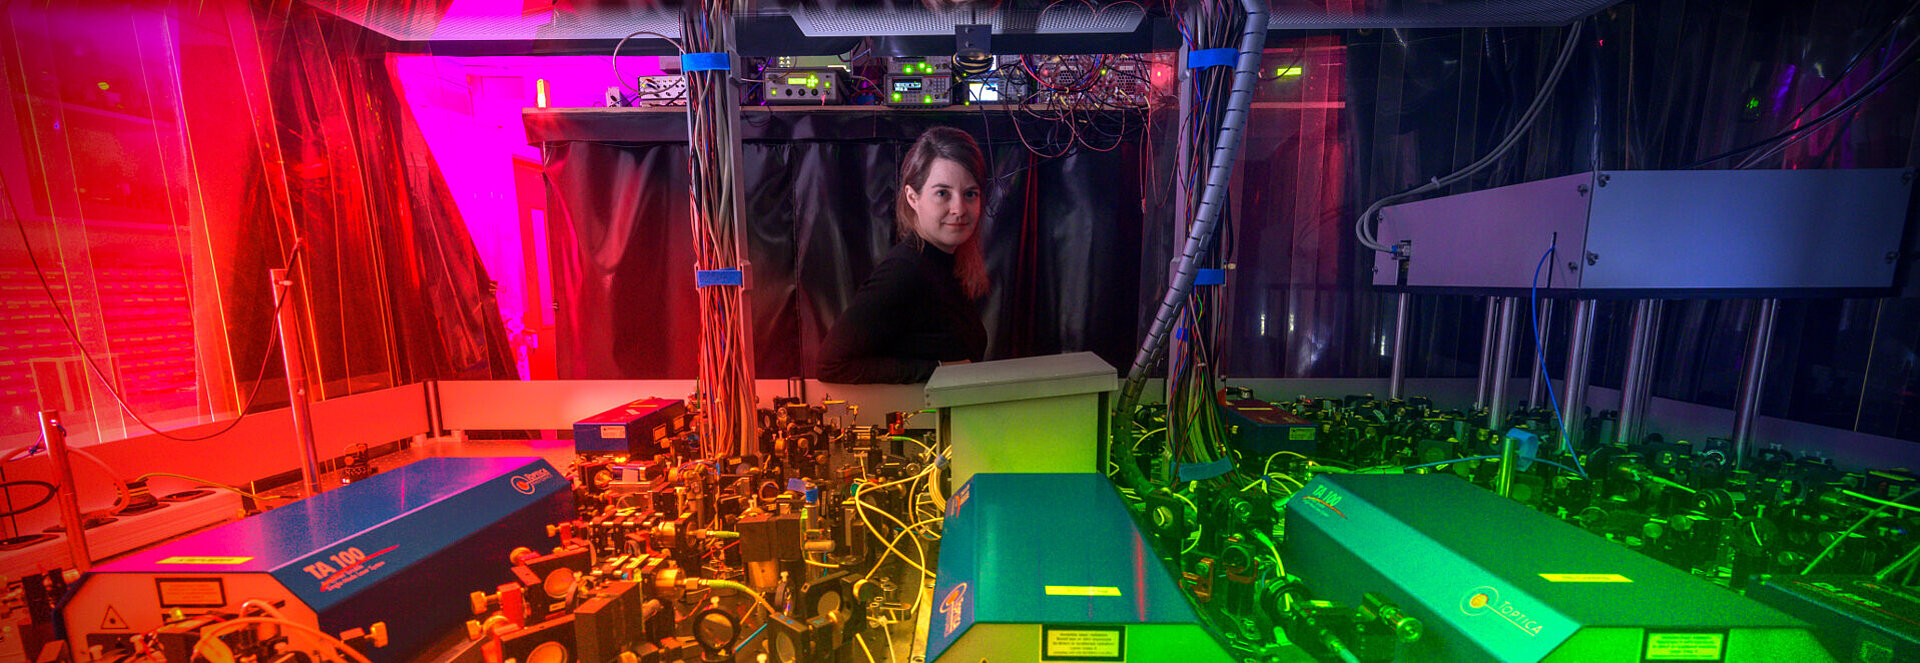 Monika Aidelsburger in front of an experimental setup for quantum experiments.